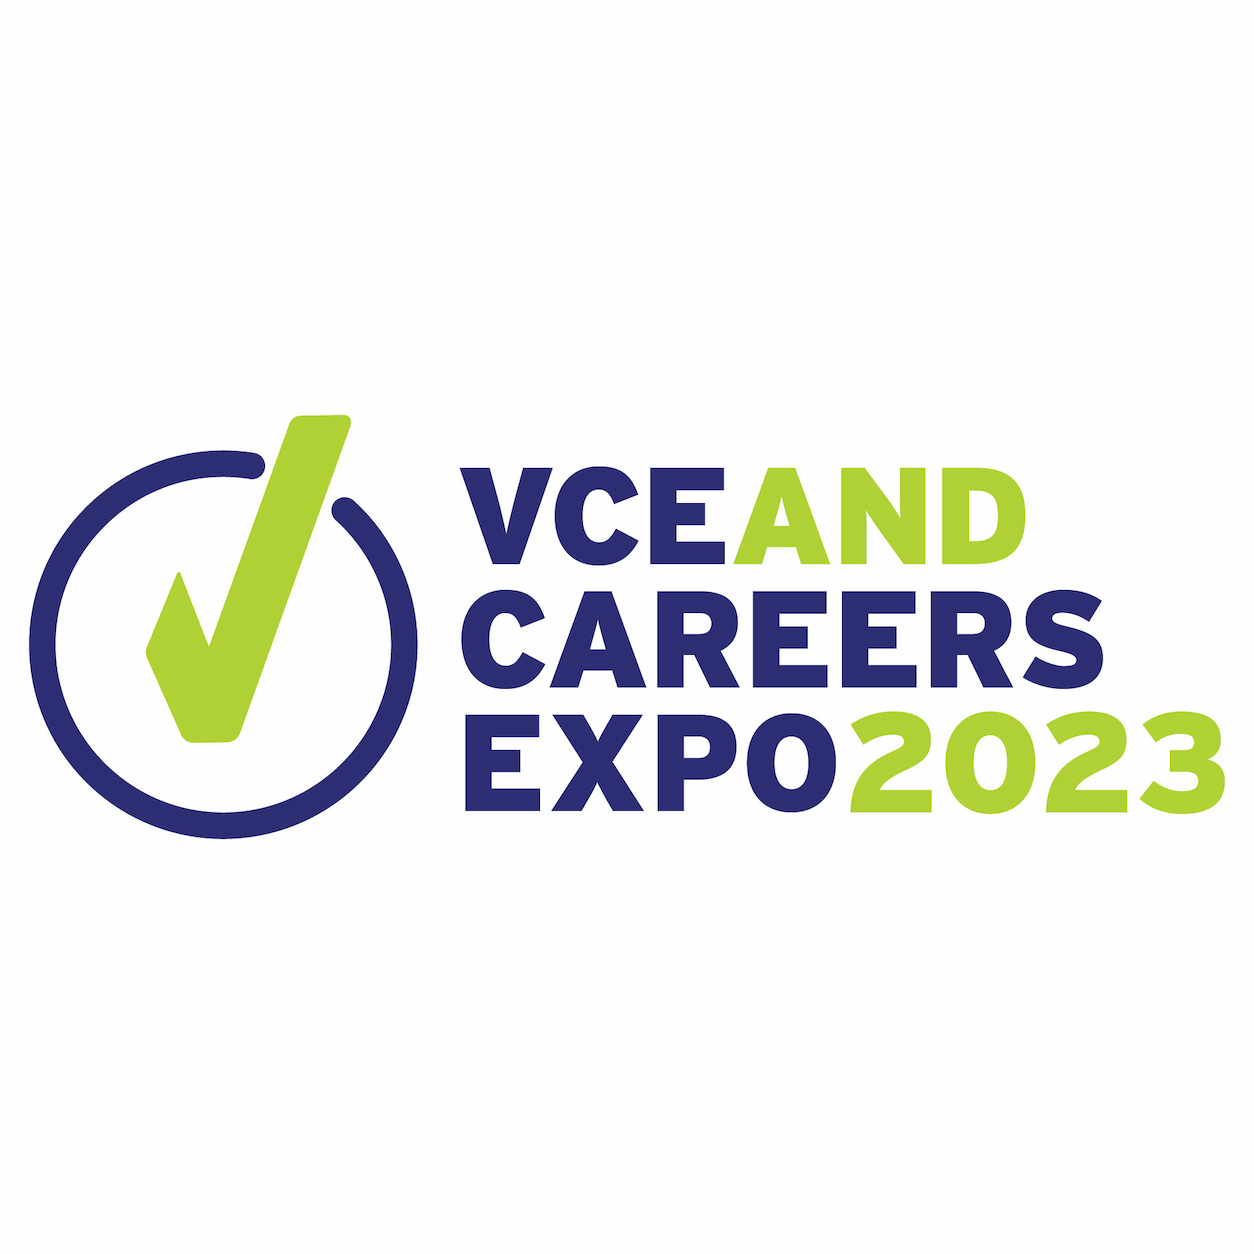 VCE AND CAREERS EXPO 2023 logo